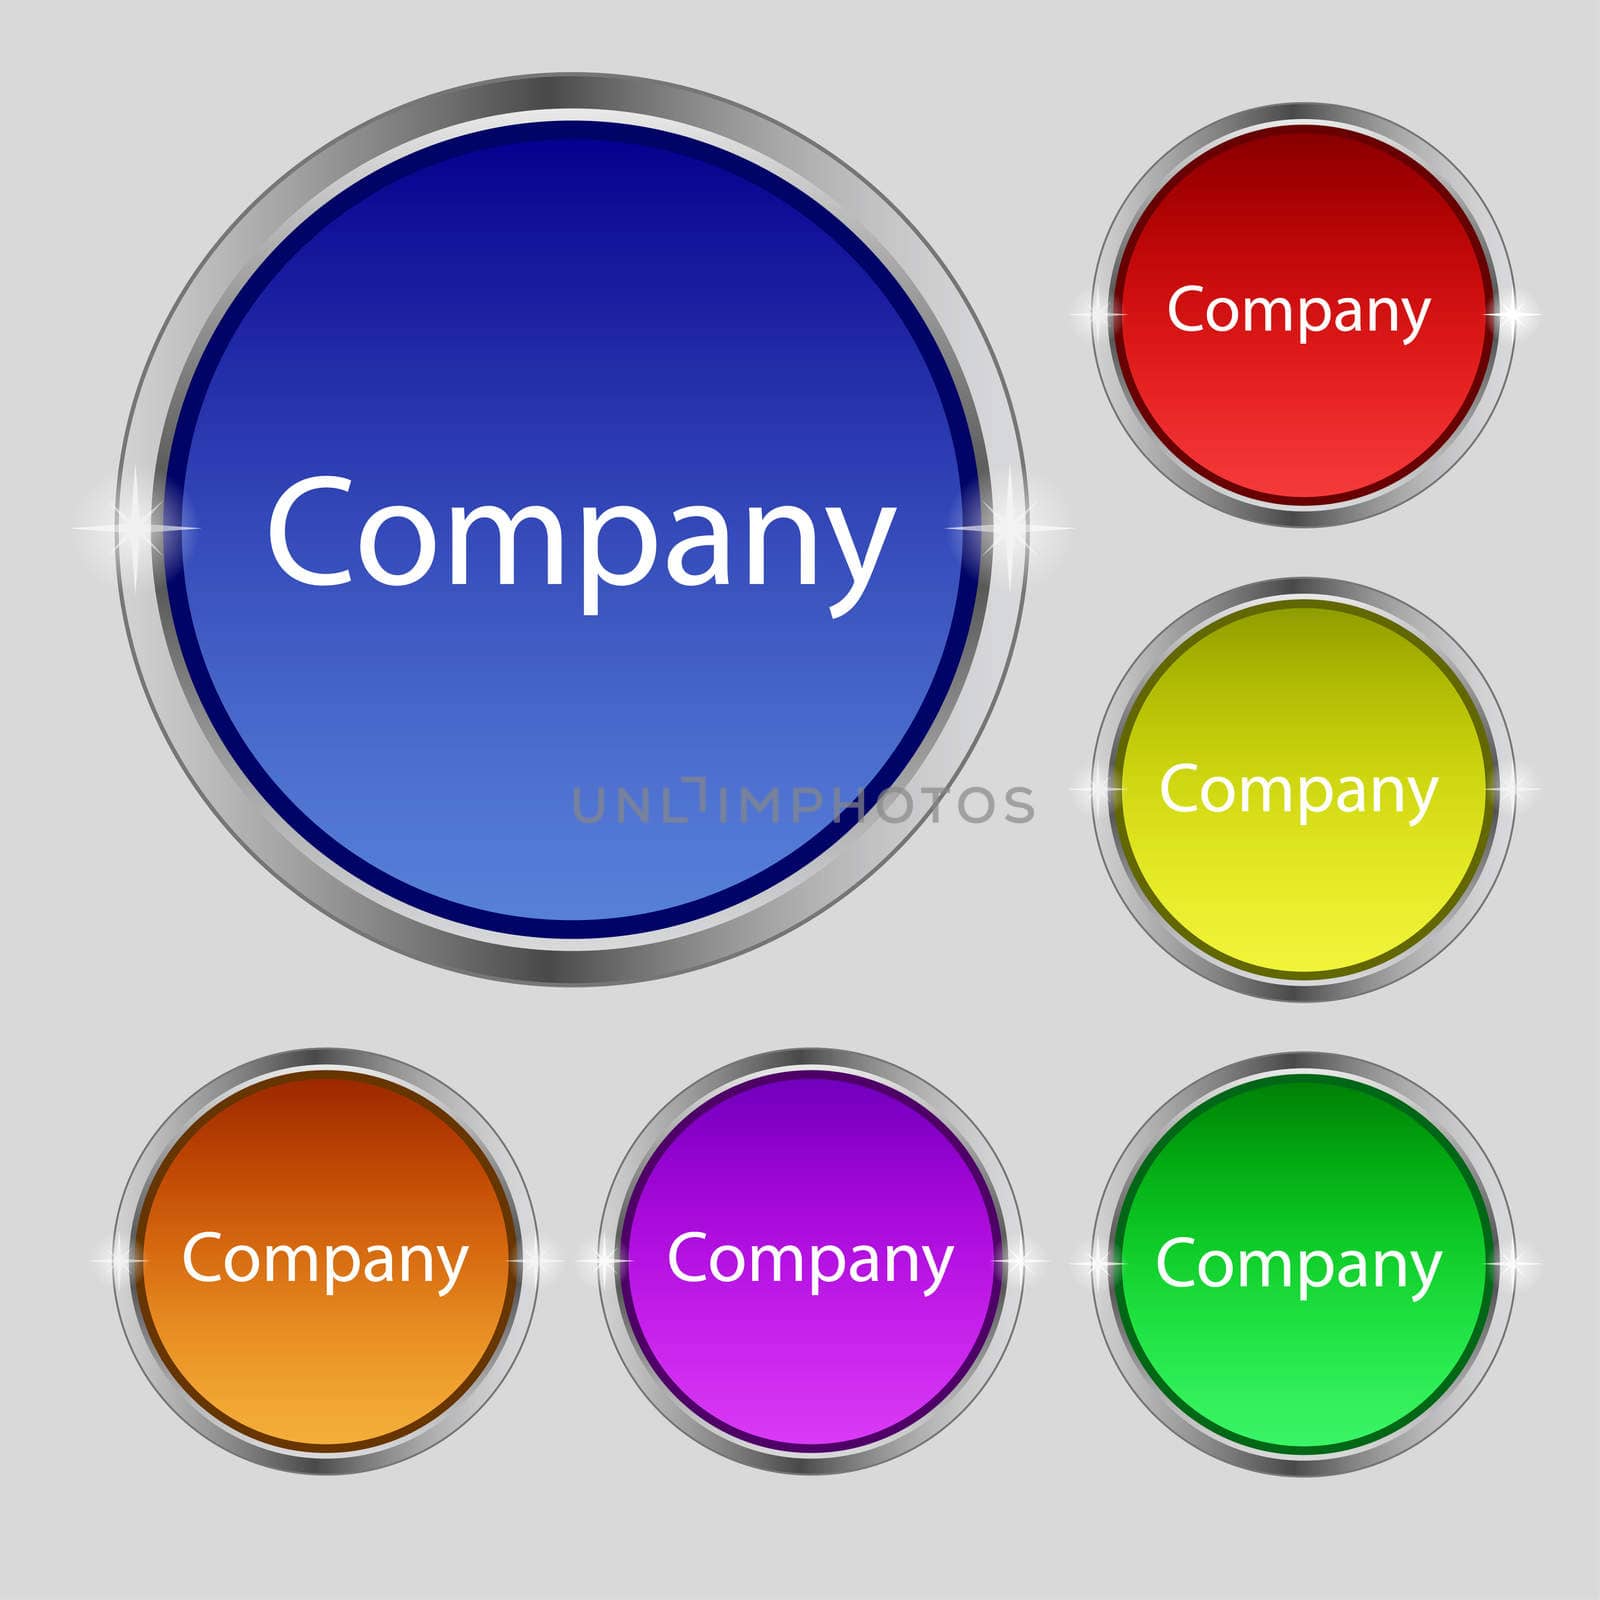 company sign icon. tradition symbol. Business abstract circle logo. Set of colored buttons. illustration